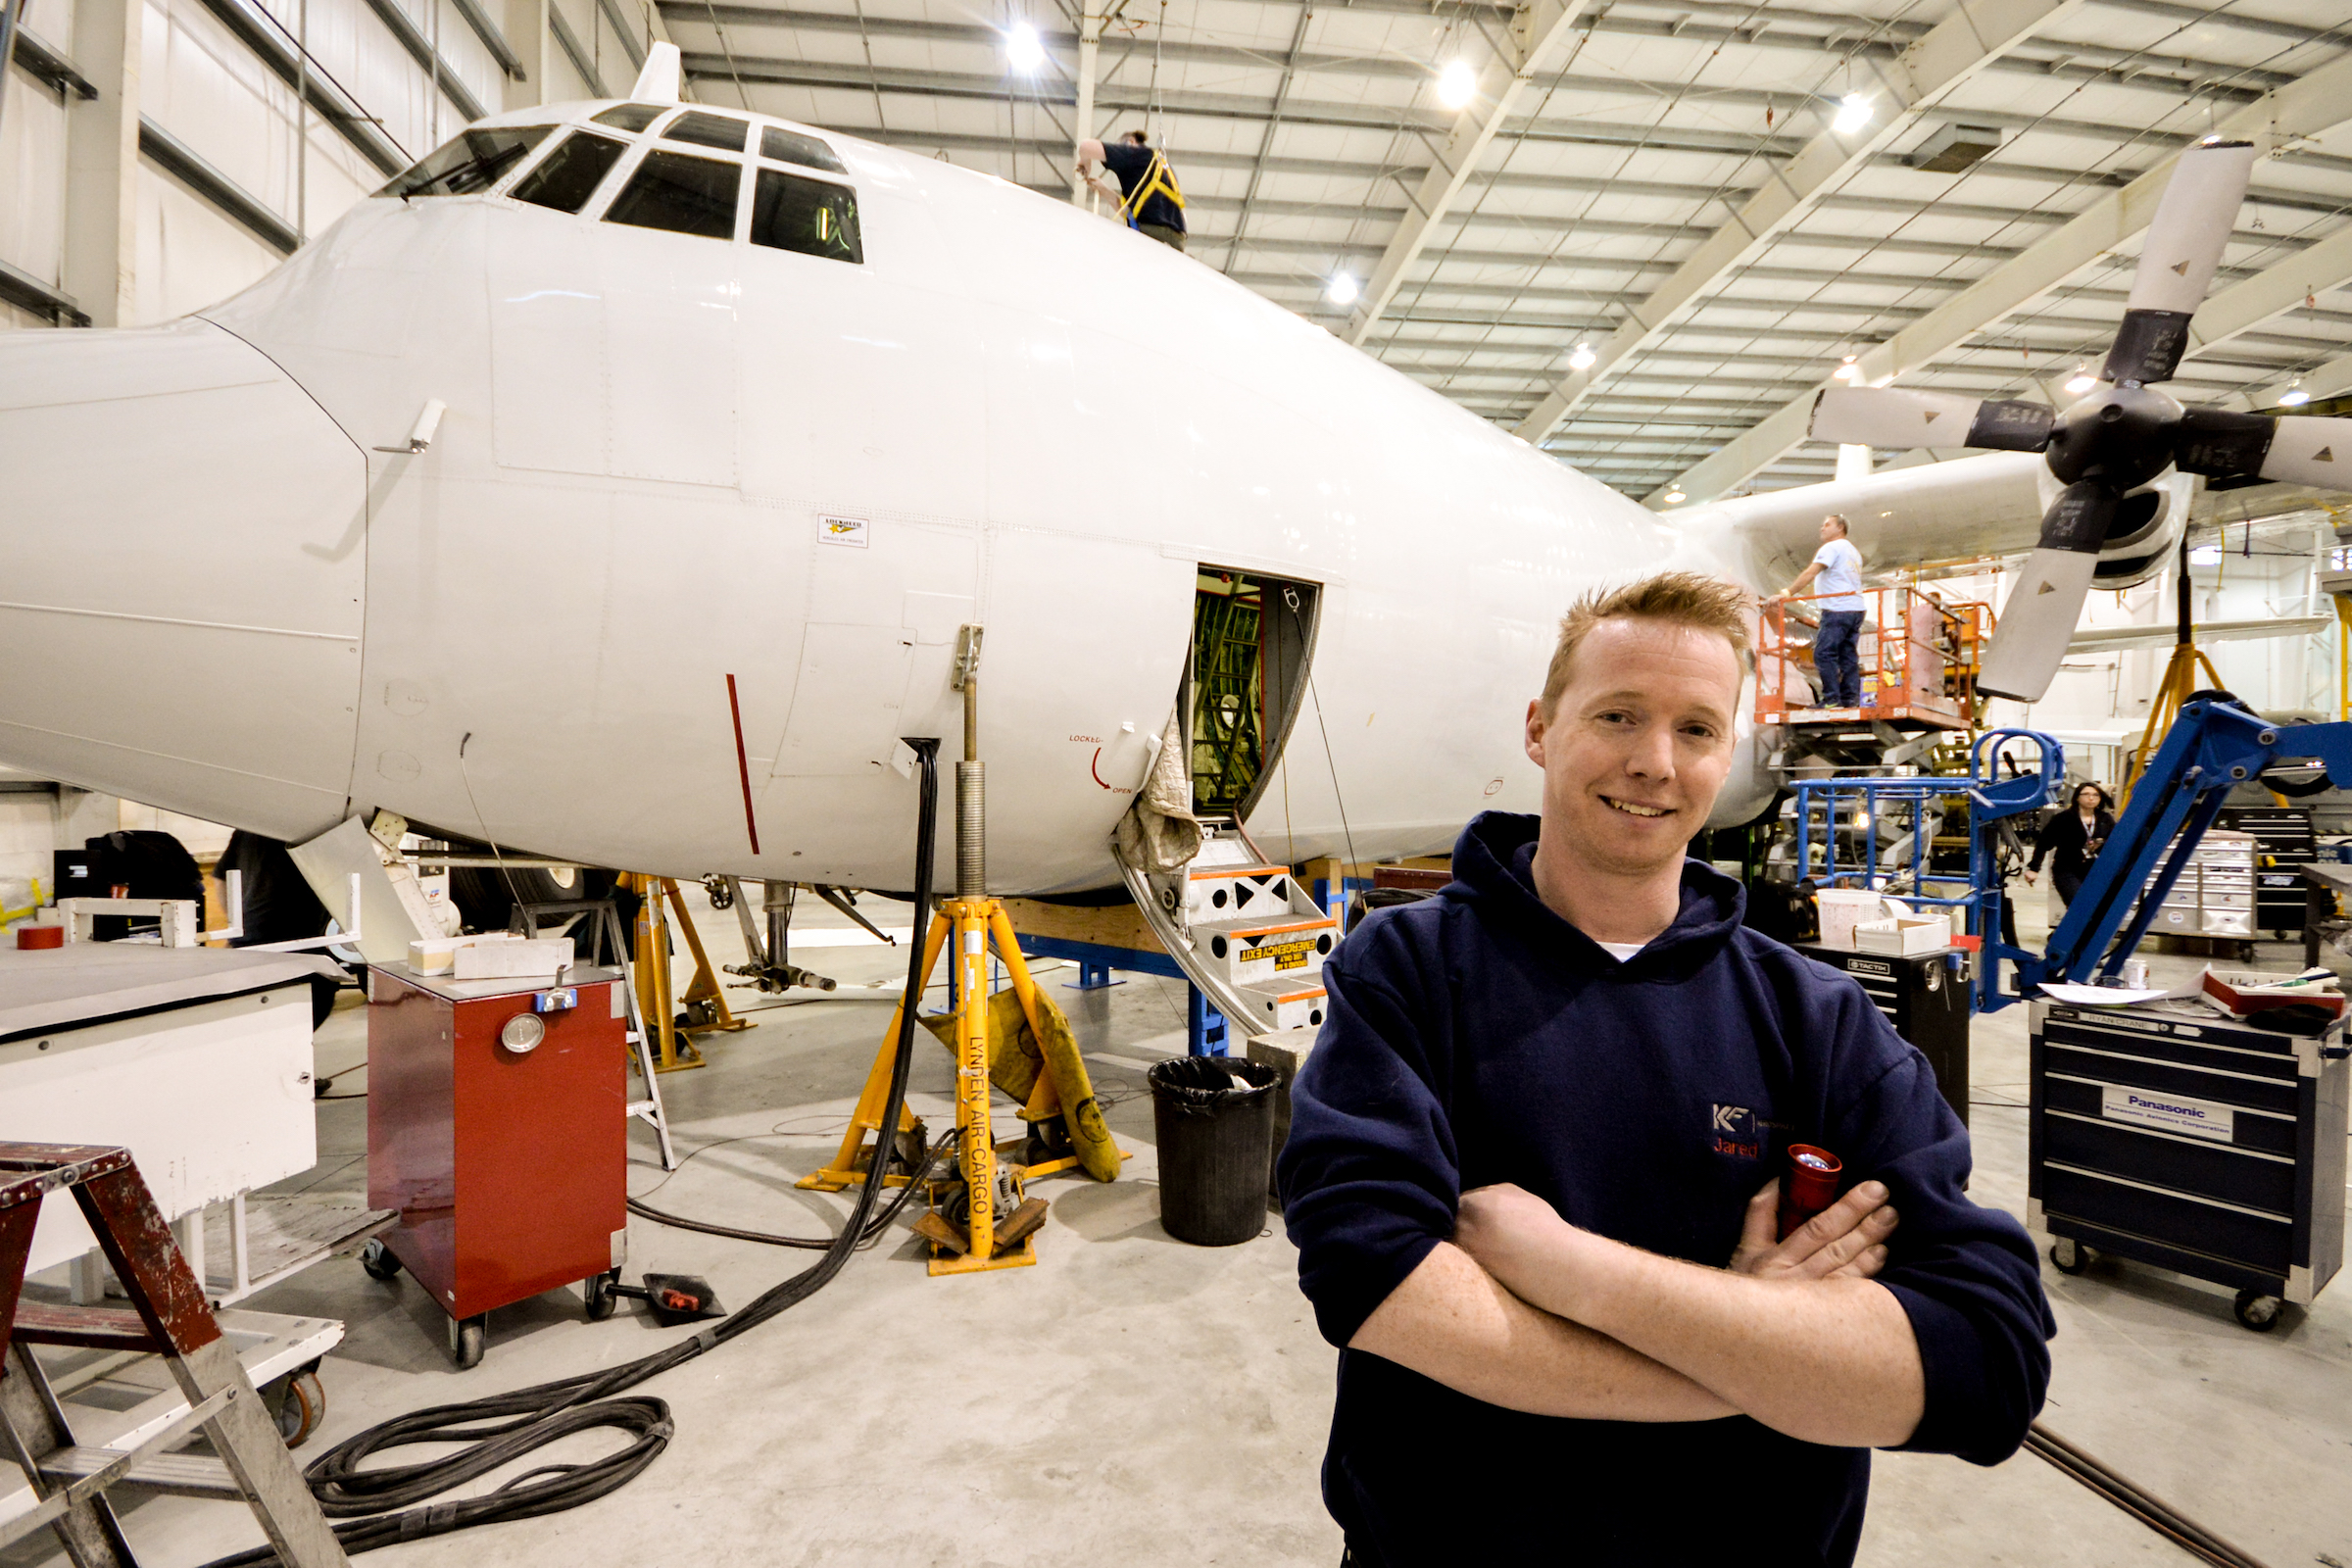 Man standing in front of an airplane being built in an hangar